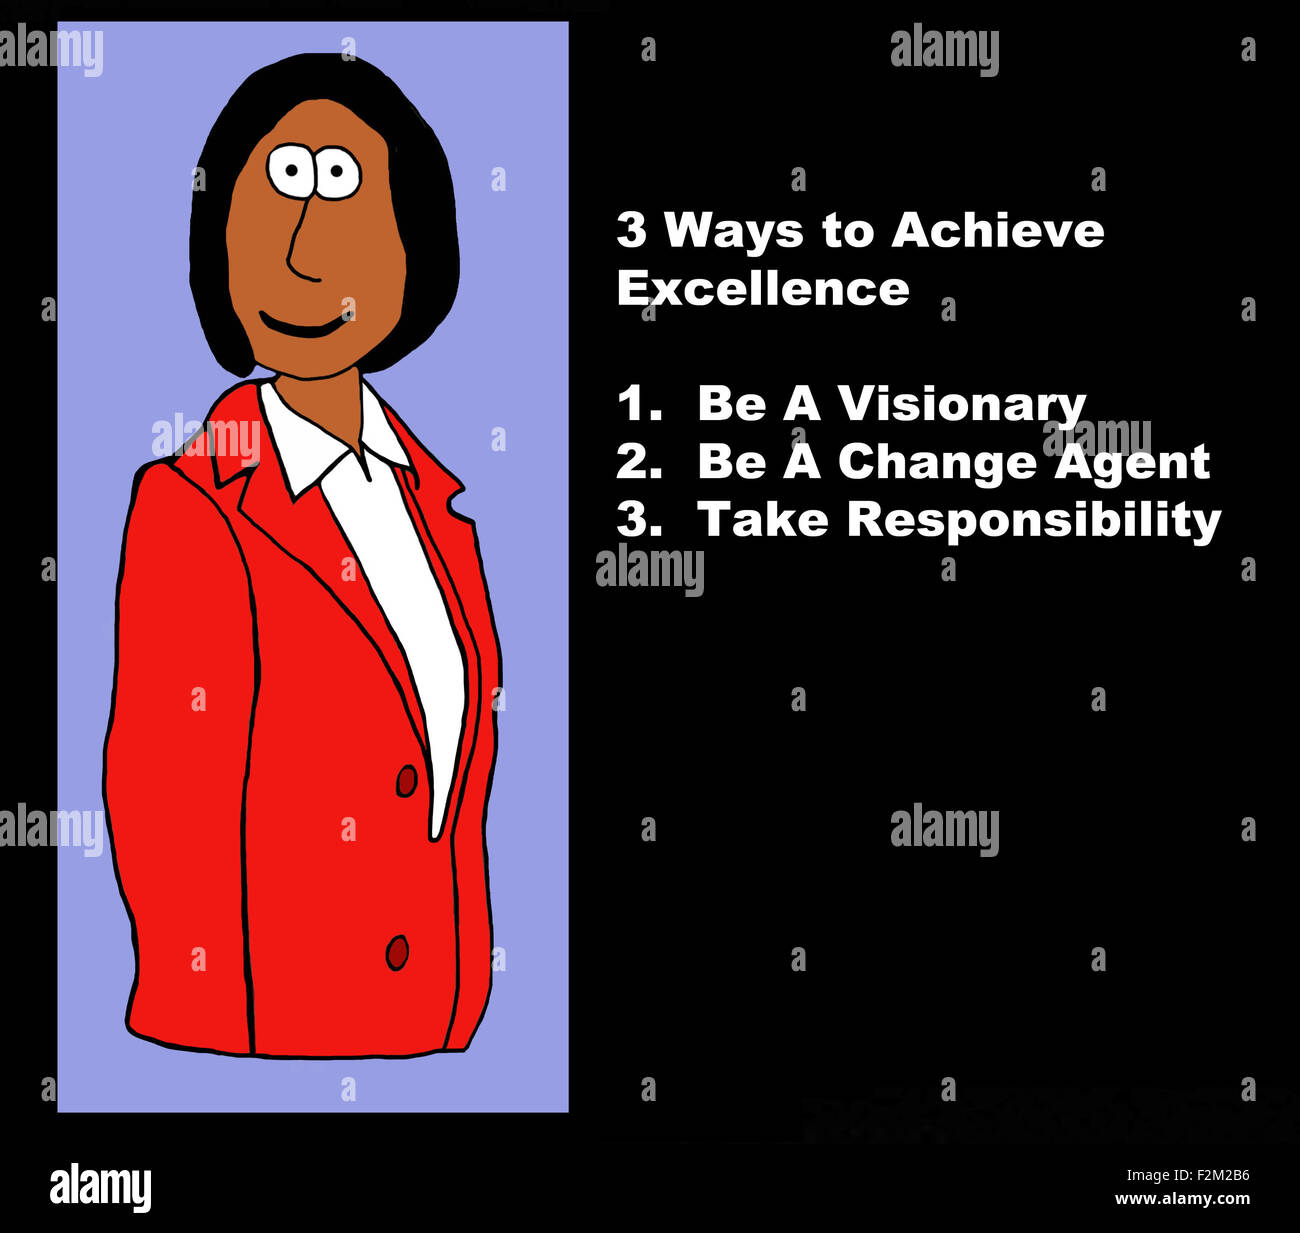 Business illustration of businesswoman and the words, '3 ways to achieve excellence: visionary, change agent, responsibility'. Stock Photo